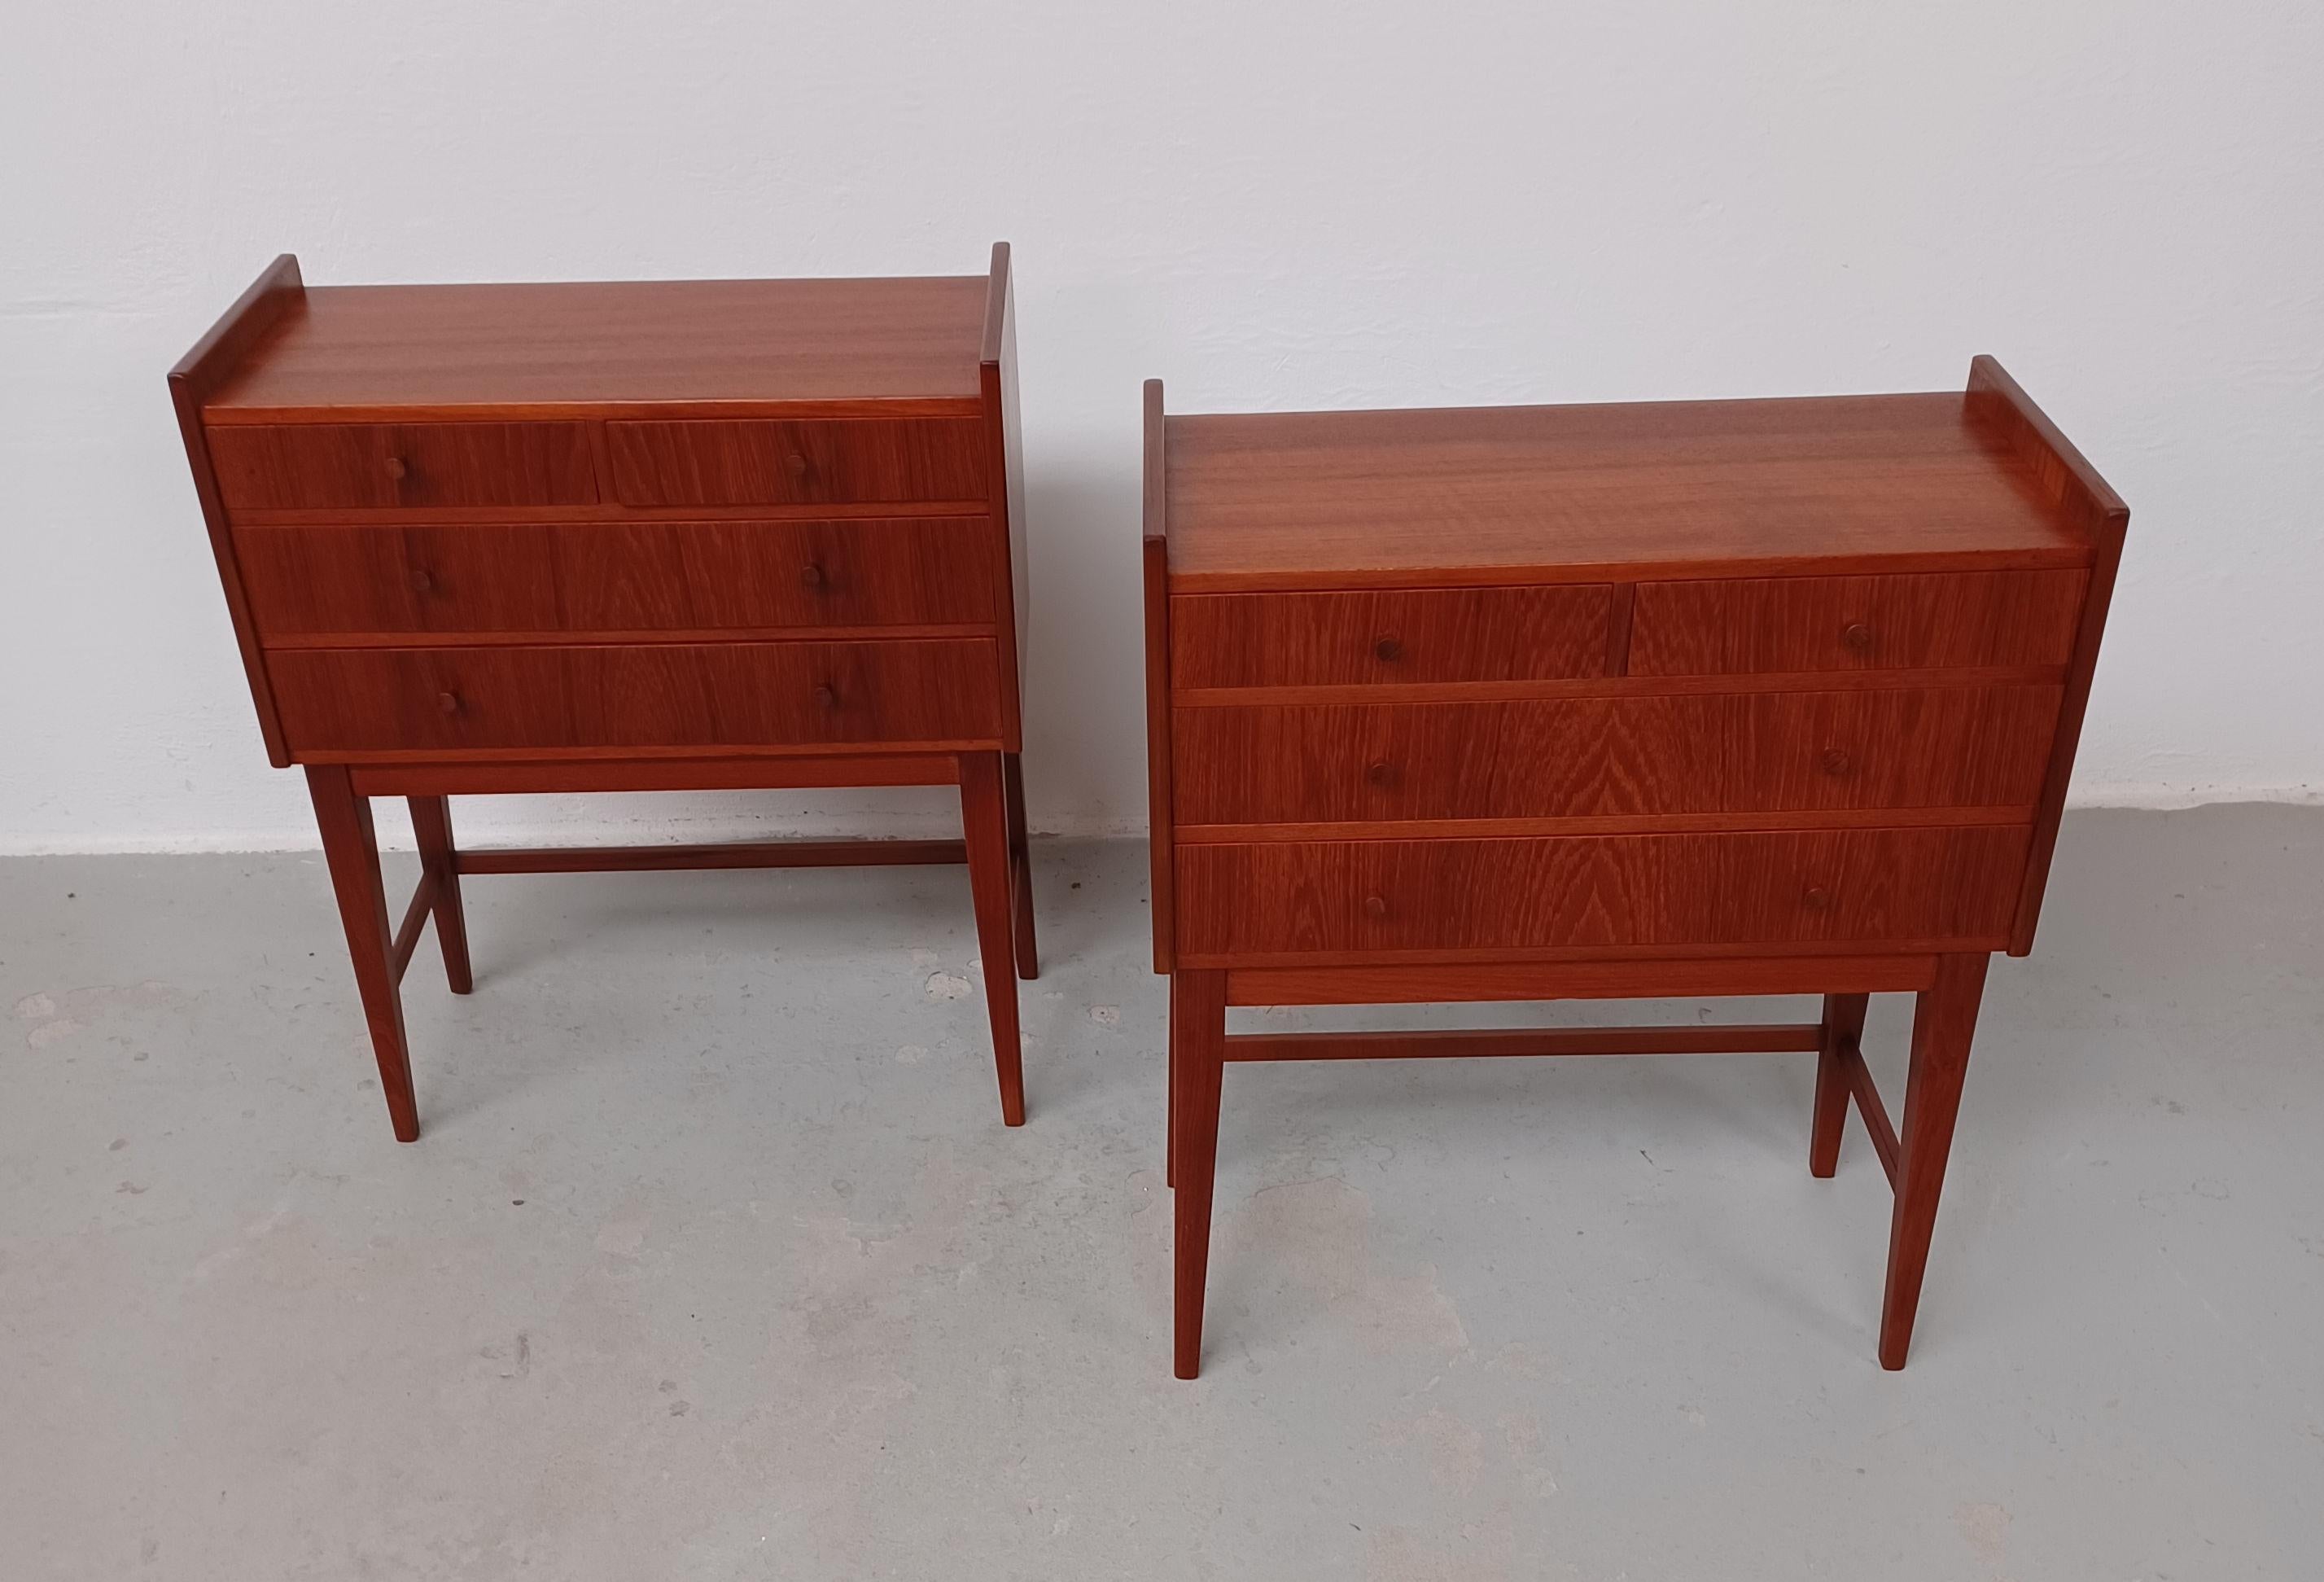 1960s Set of two small fully restored and refinished Danish teak dressers or nightstands.

Two identical small teak dresser each with 4 drawers that will do well together in almost any room they are placed in... as dressers, sidetables, entry